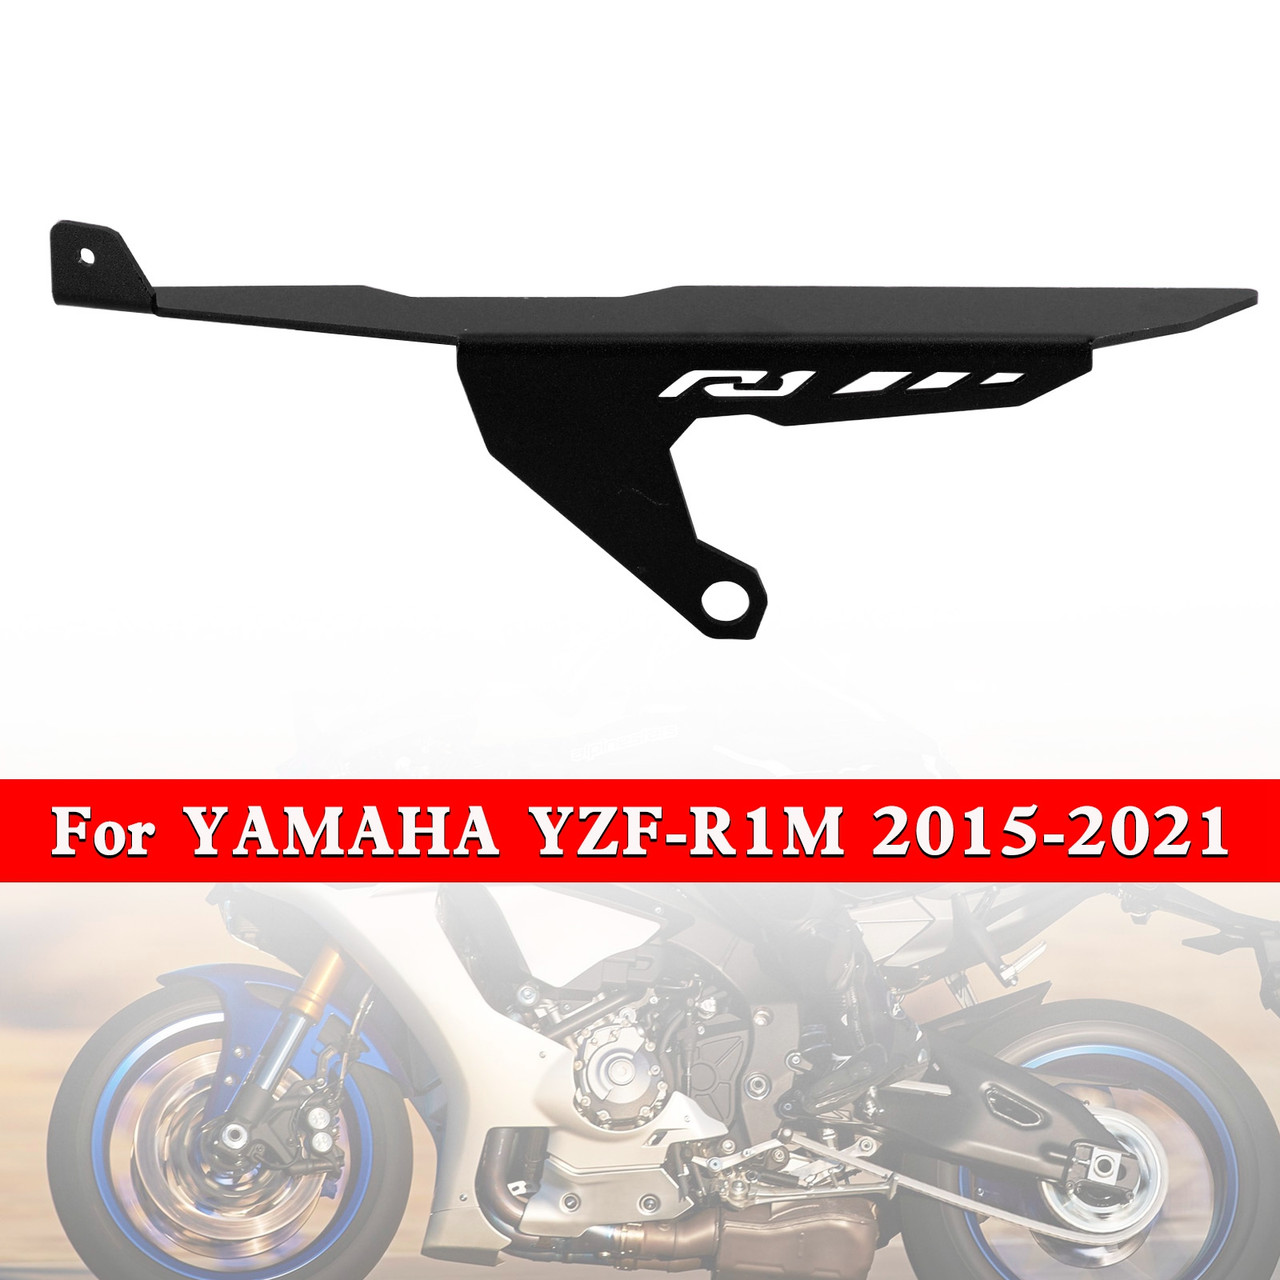 Rear Sprocket Chain Guard Cover For Yamaha YZF R1 R1M R1S 2015-2021 Black